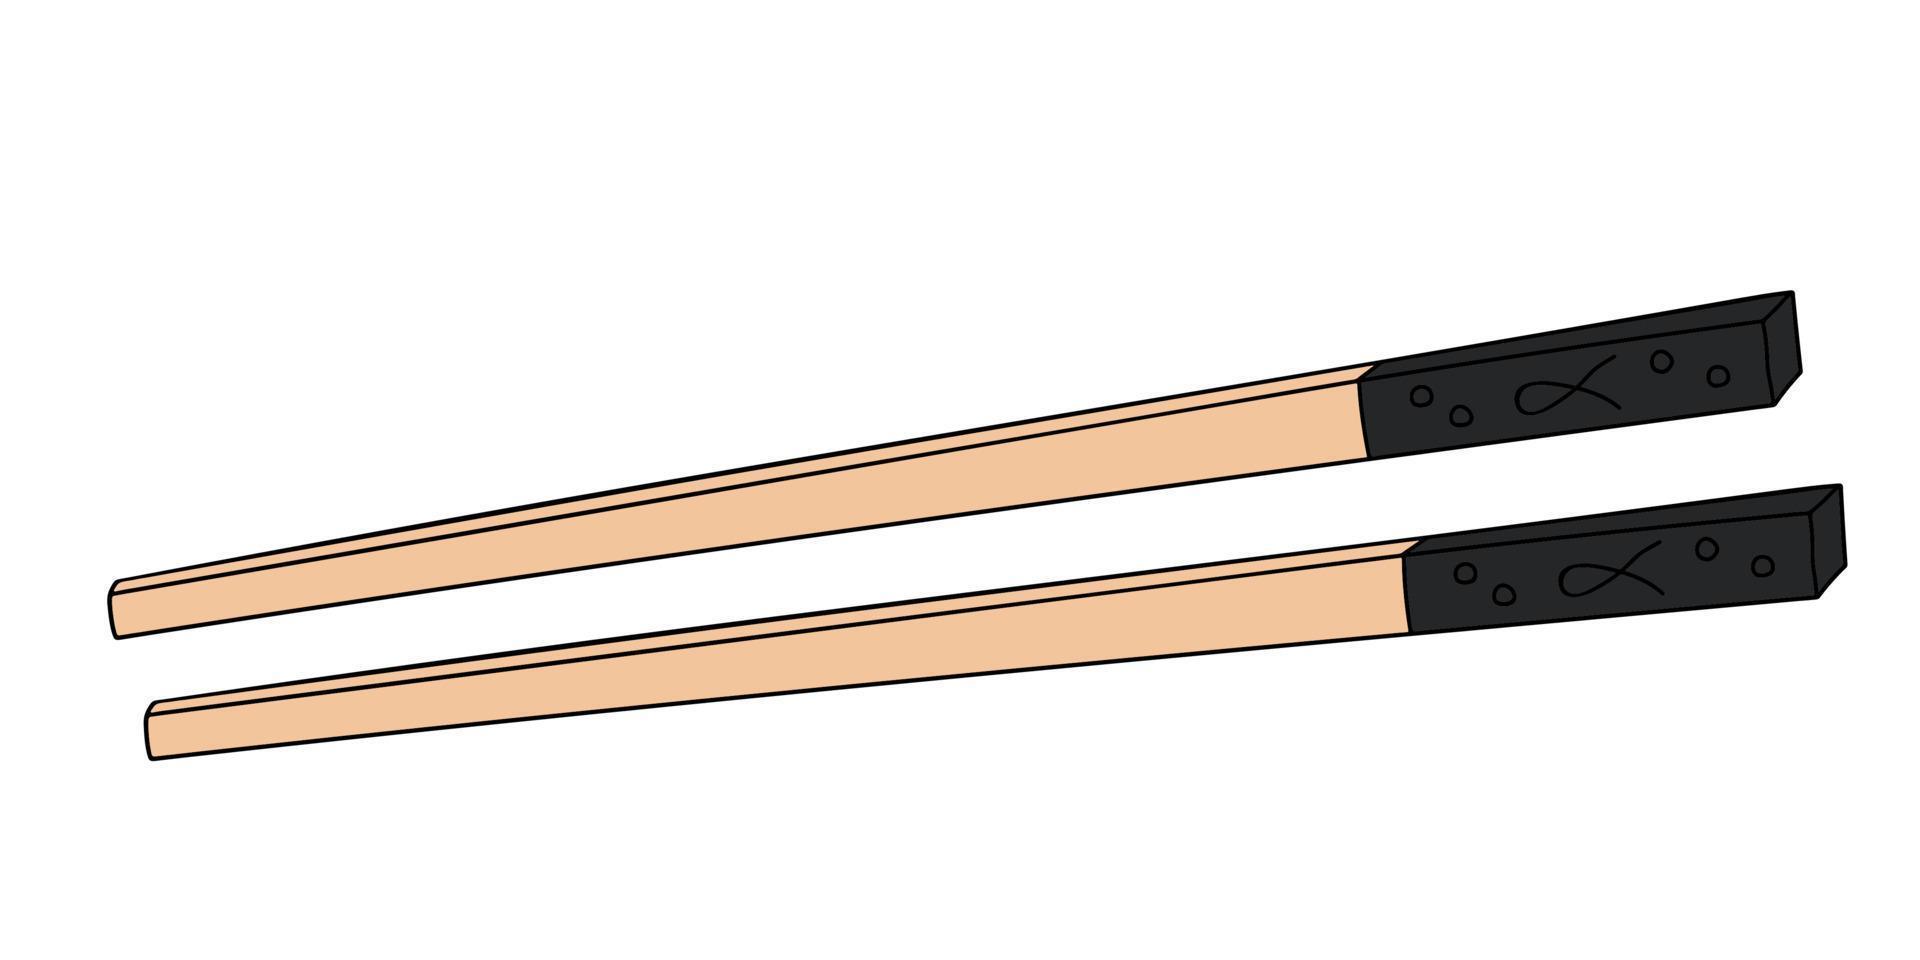 Hand drawn wooden chopsticksfor eating sushi, sea food, japanese and chinese food vector